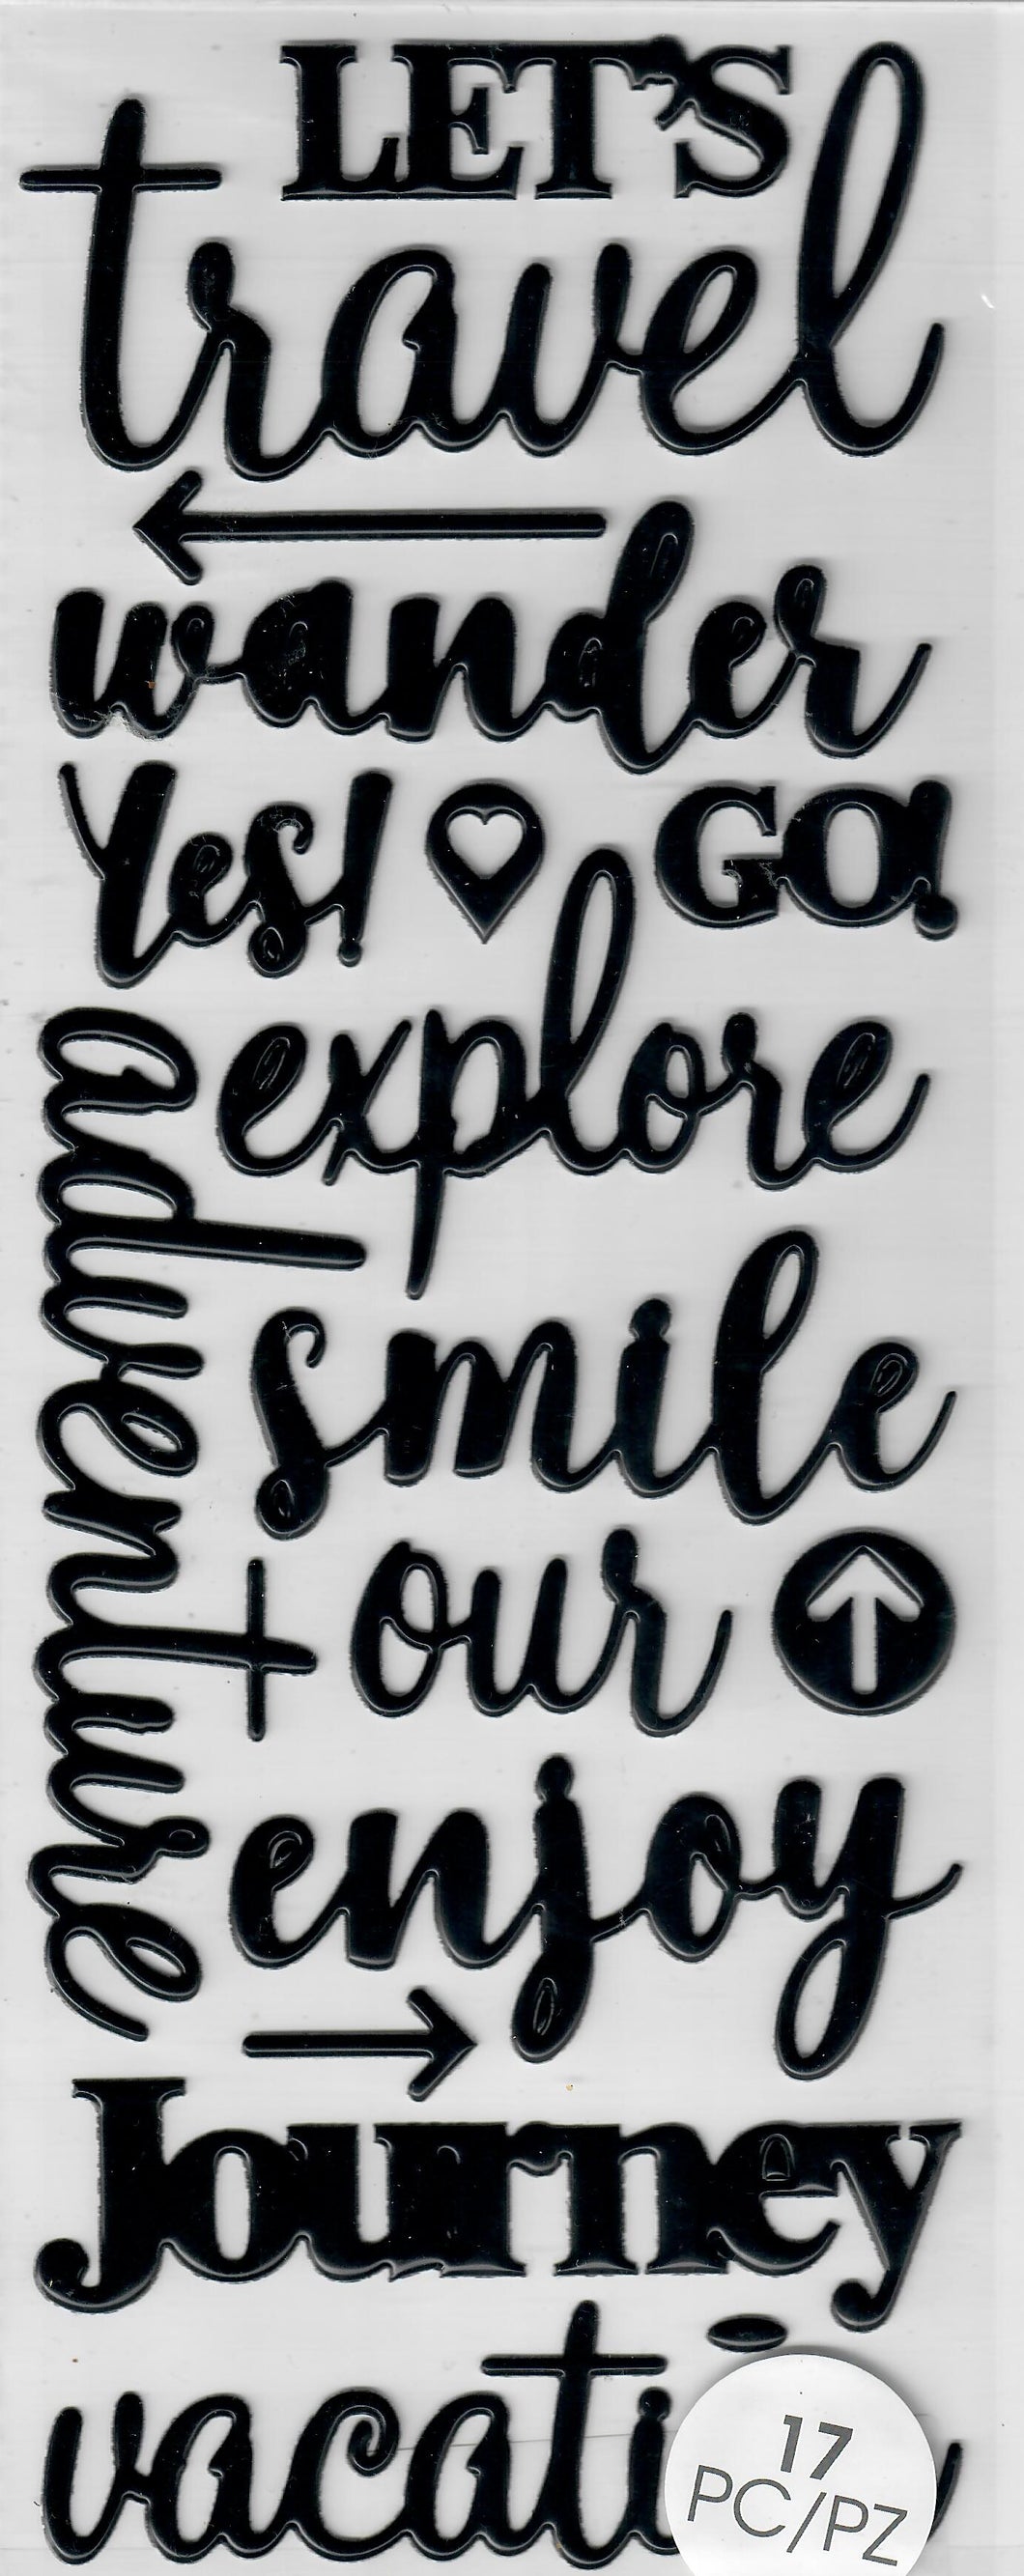 Travel - Momenta Dimensional - Puffy word stickers - Travel words in black